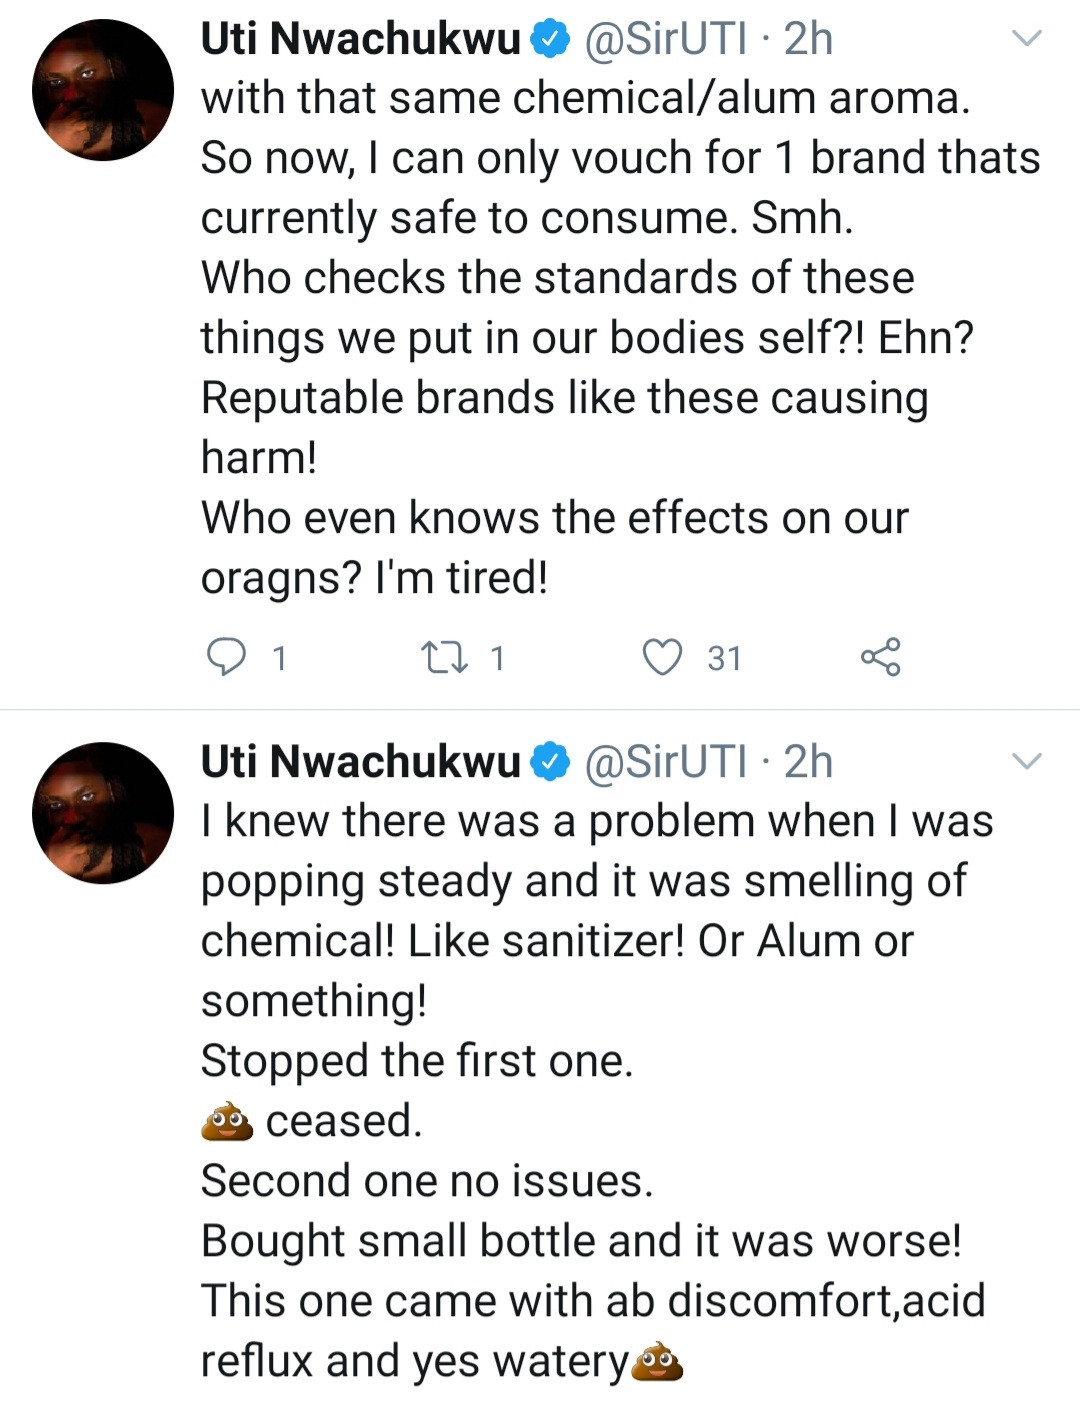 Uti Nwachukwu expresses concern about bottled water sold in Nigeria after suffering diarrhoea when he consumed two "big brands"